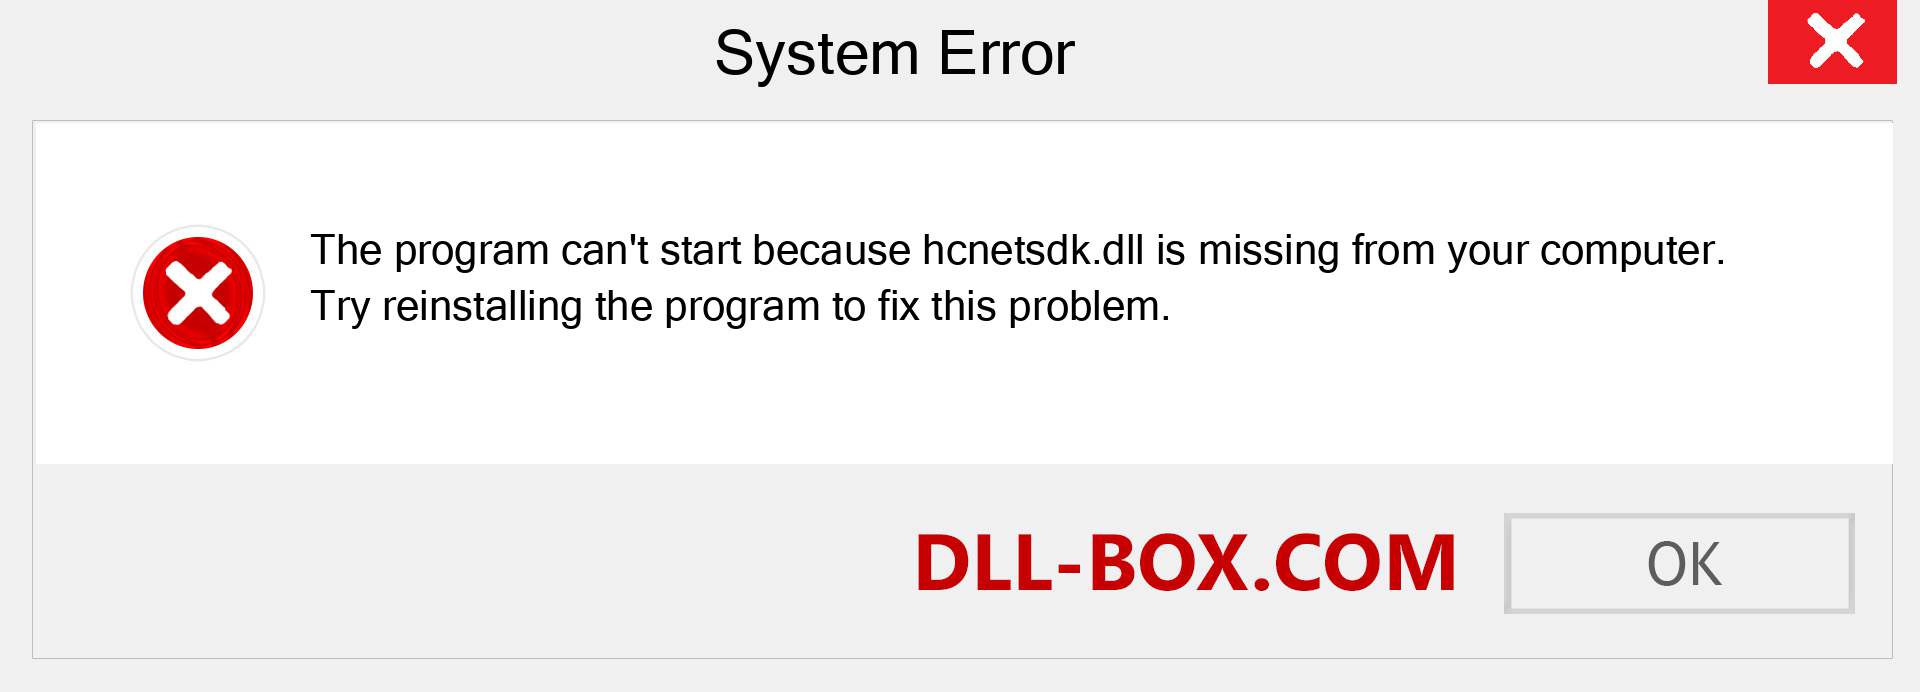  hcnetsdk.dll file is missing?. Download for Windows 7, 8, 10 - Fix  hcnetsdk dll Missing Error on Windows, photos, images